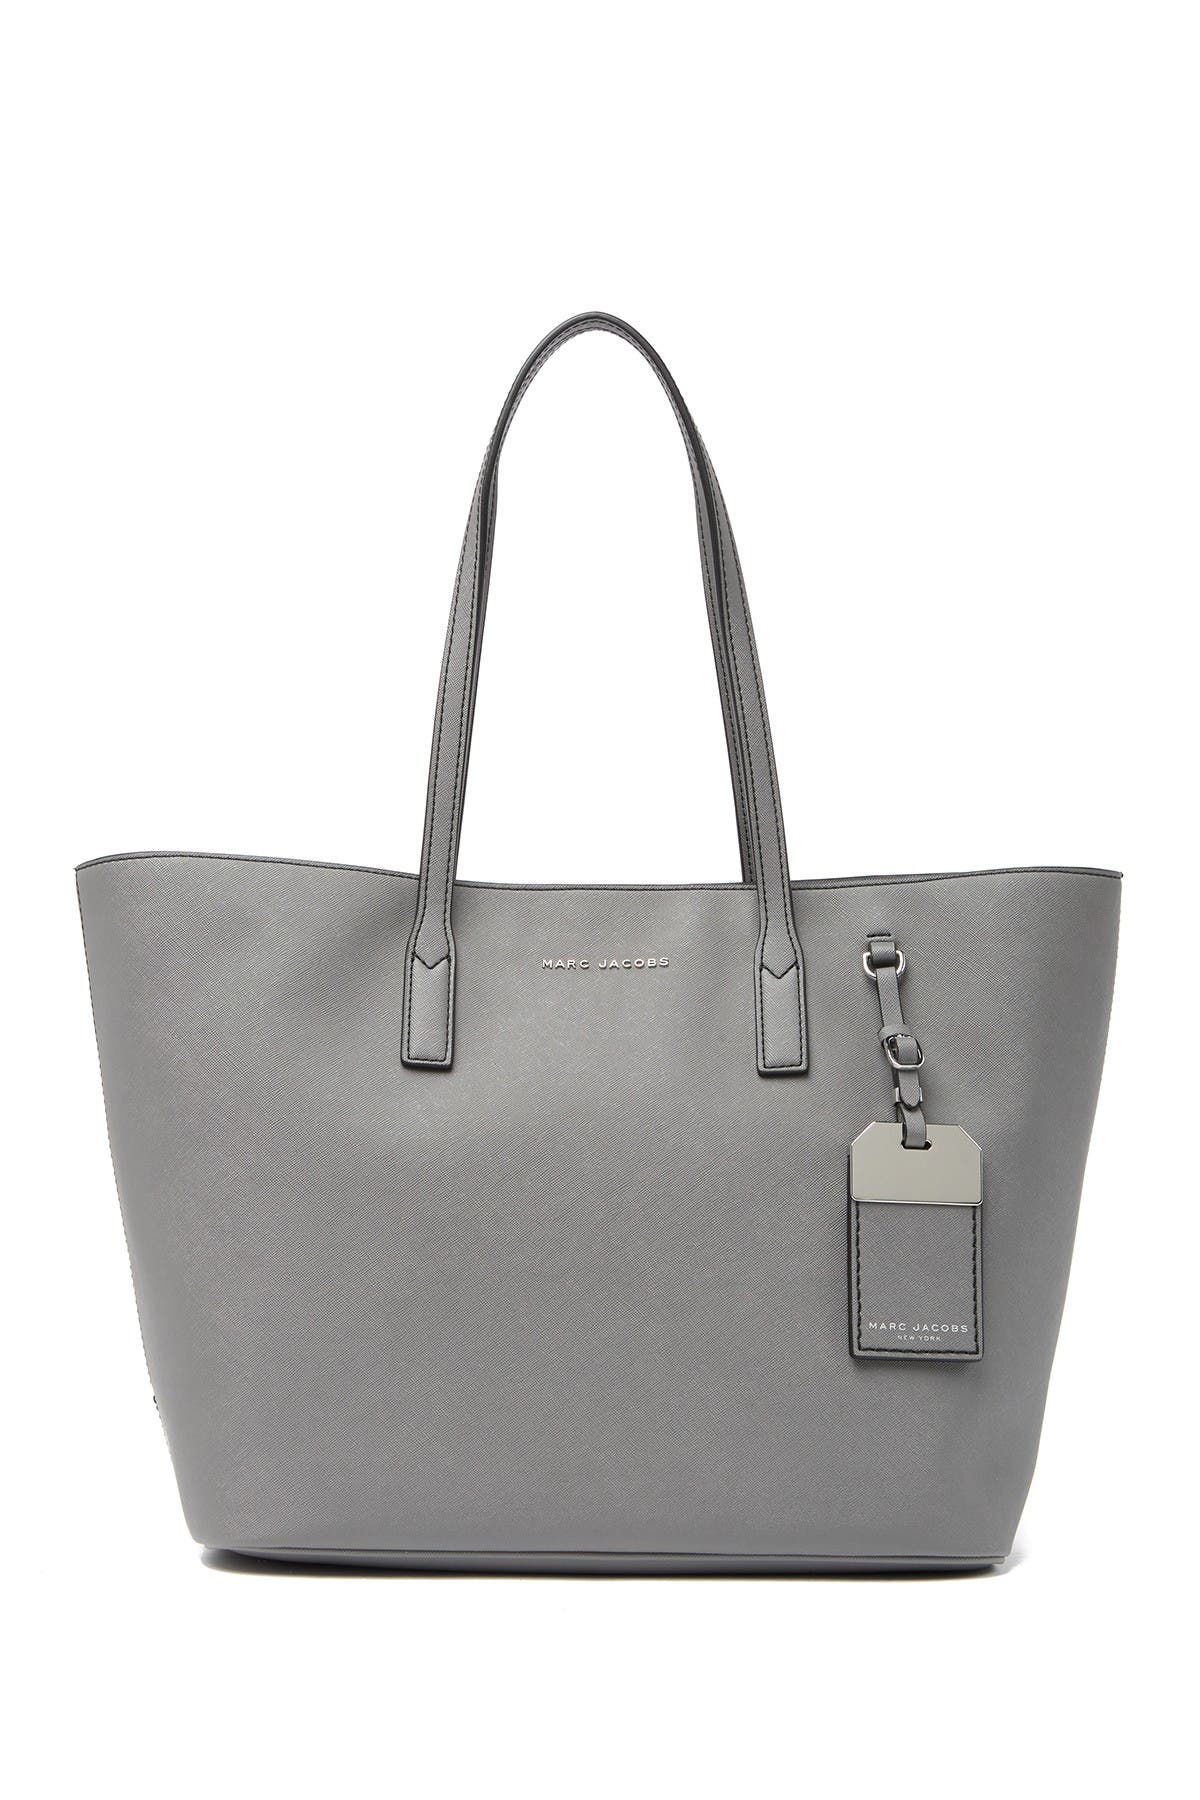 marc jacobs tag tote